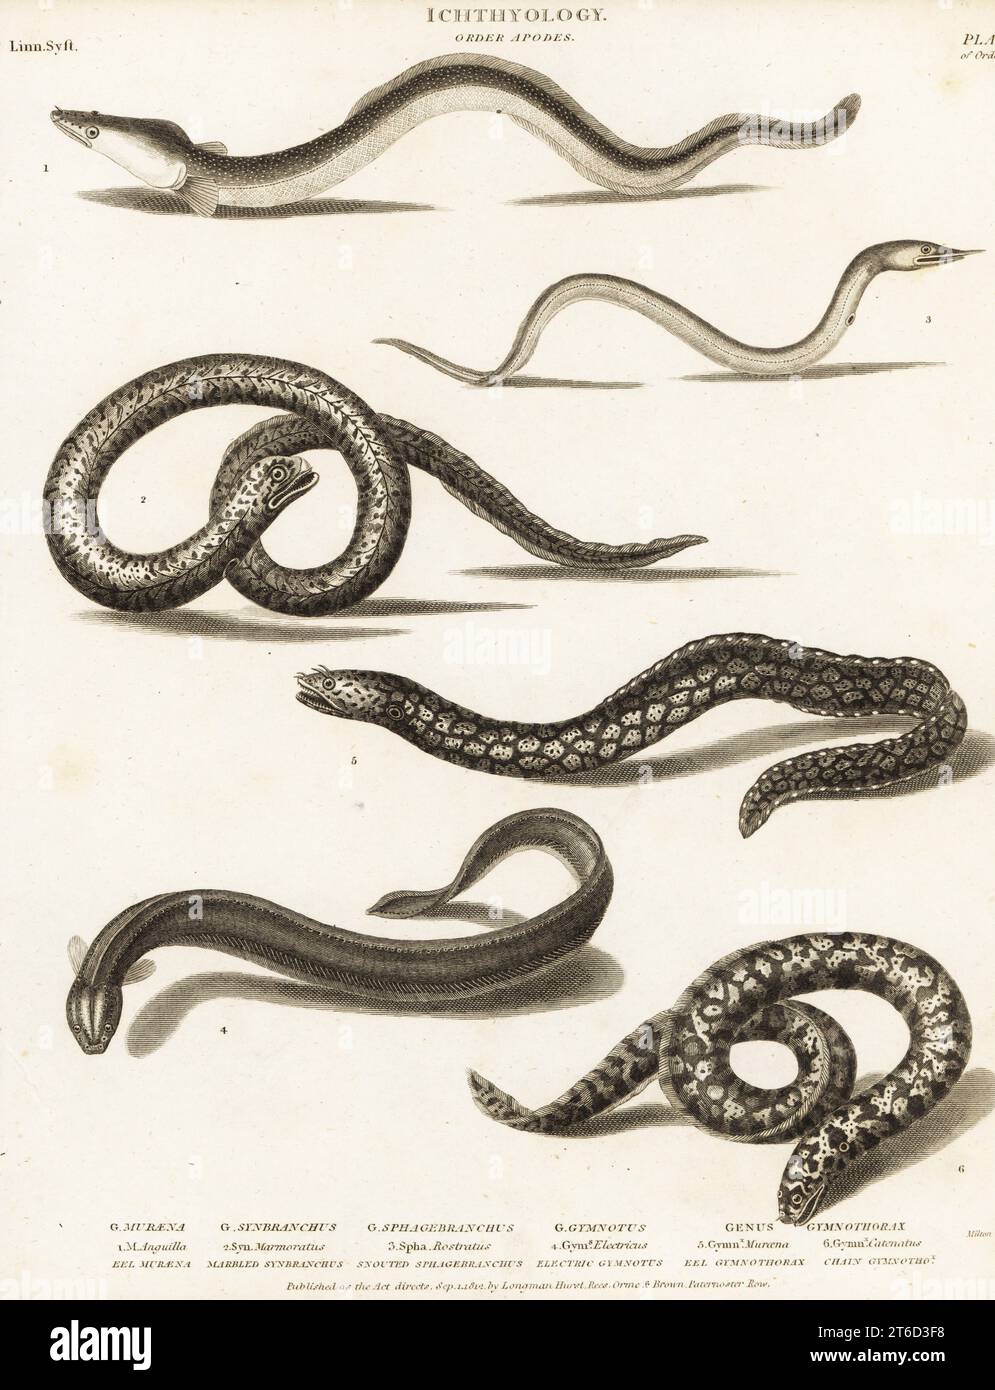 European eel, Anguilla anguilla, critically endangered 1, marbled swamp eel, Synbranchus marmoratus 2, snake eel, Caecula species 3, electric eel, Electrophorus electricus 4, Mediterranean moray, Muraena helena 5, and chain moray, Echidna catenata 6. Copperplate engraving by Milton from Abraham Rees' Cyclopedia or Universal Dictionary of Arts, Sciences and Literature, Longman, Hurst, Rees, Orme and Brown, London, 1812. Stock Photo